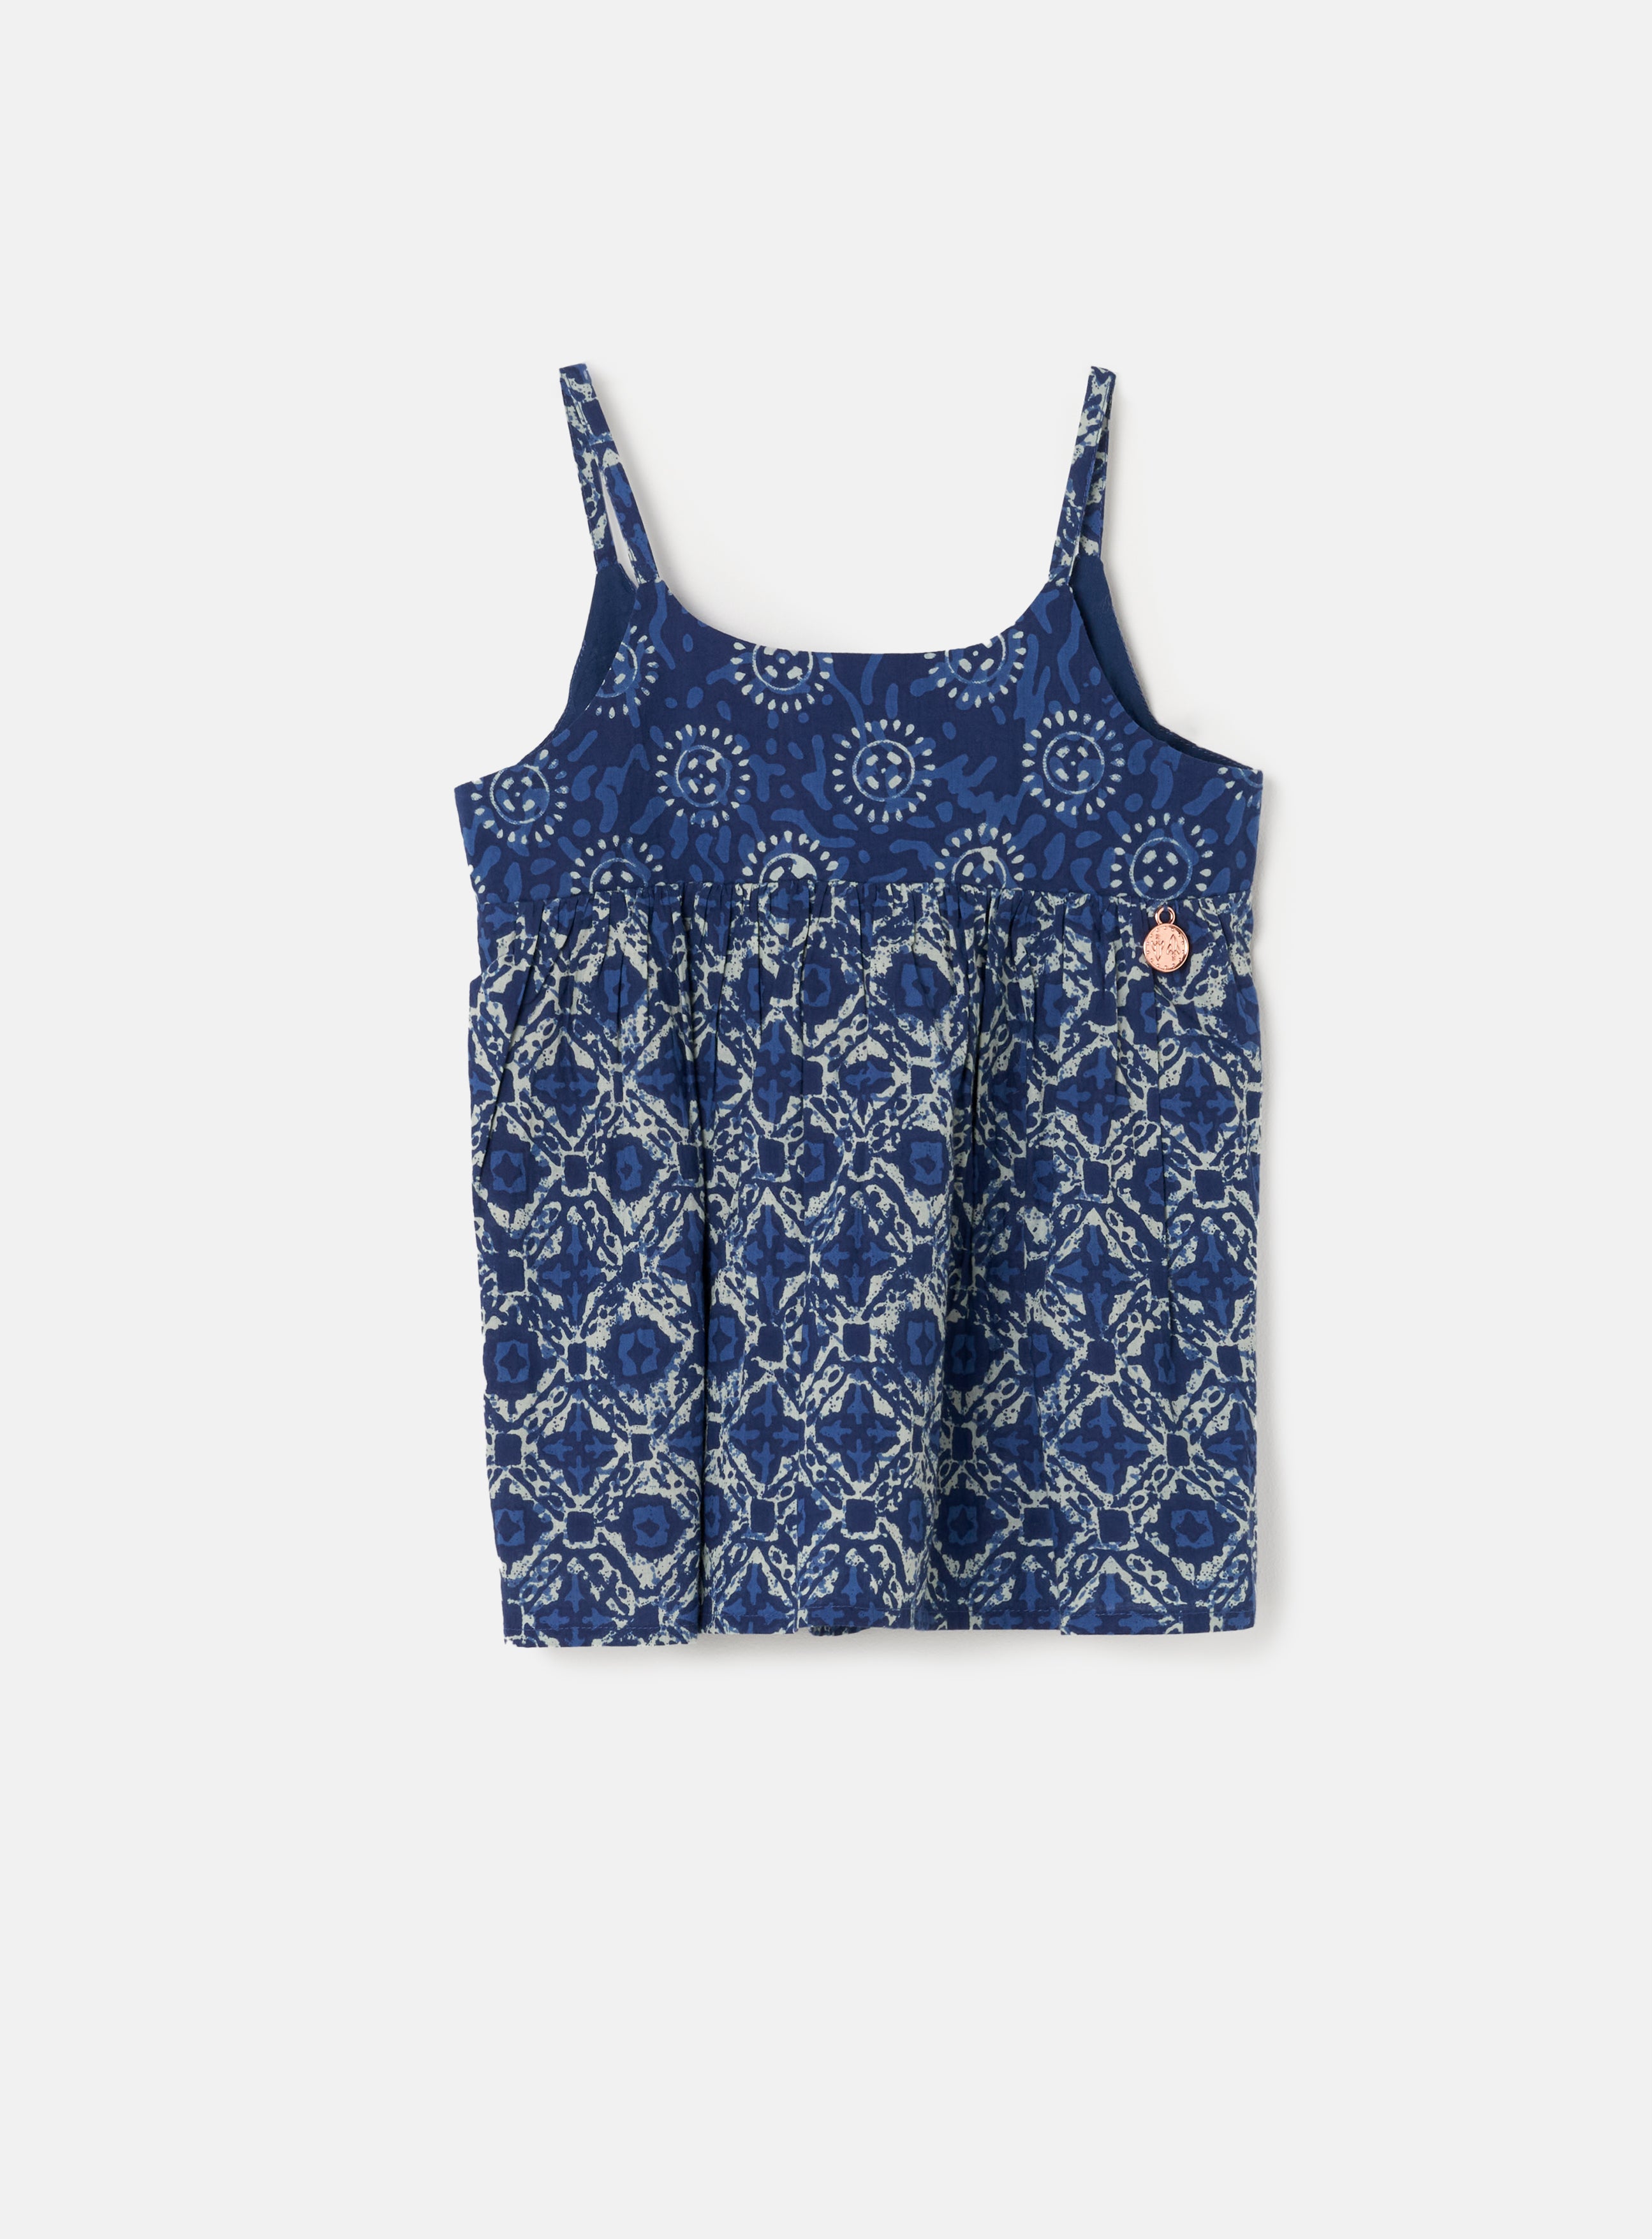 Girls Floral Printed Blue Top with Back Tie